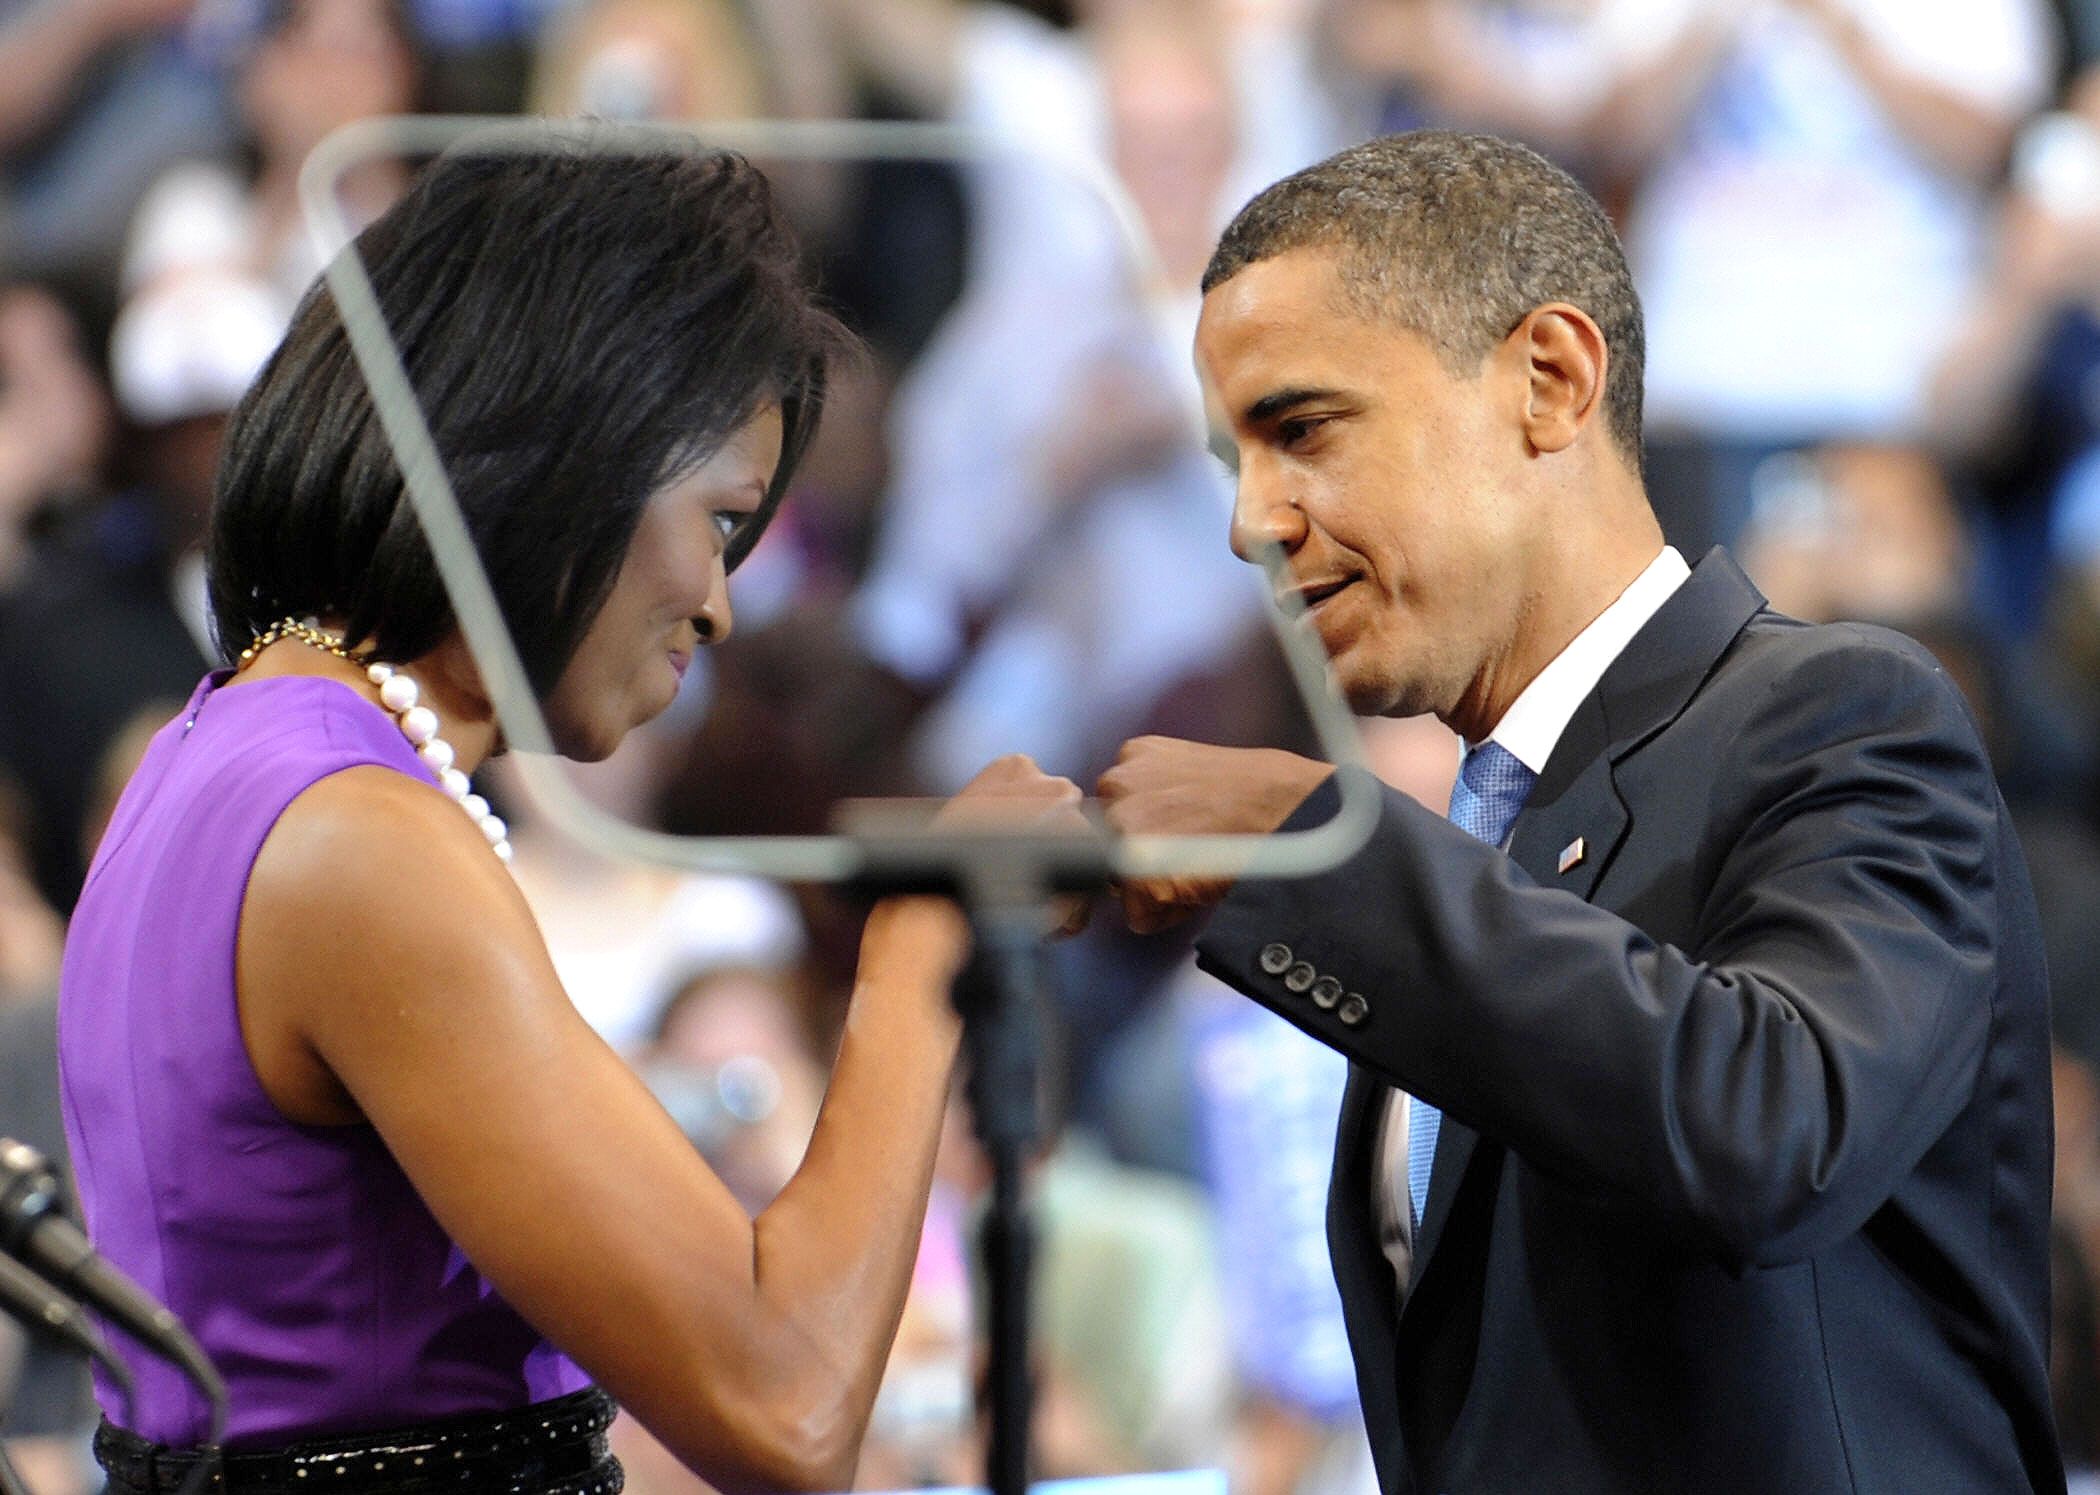 Sweetest Barak and Michelle Obama Pictures image photo